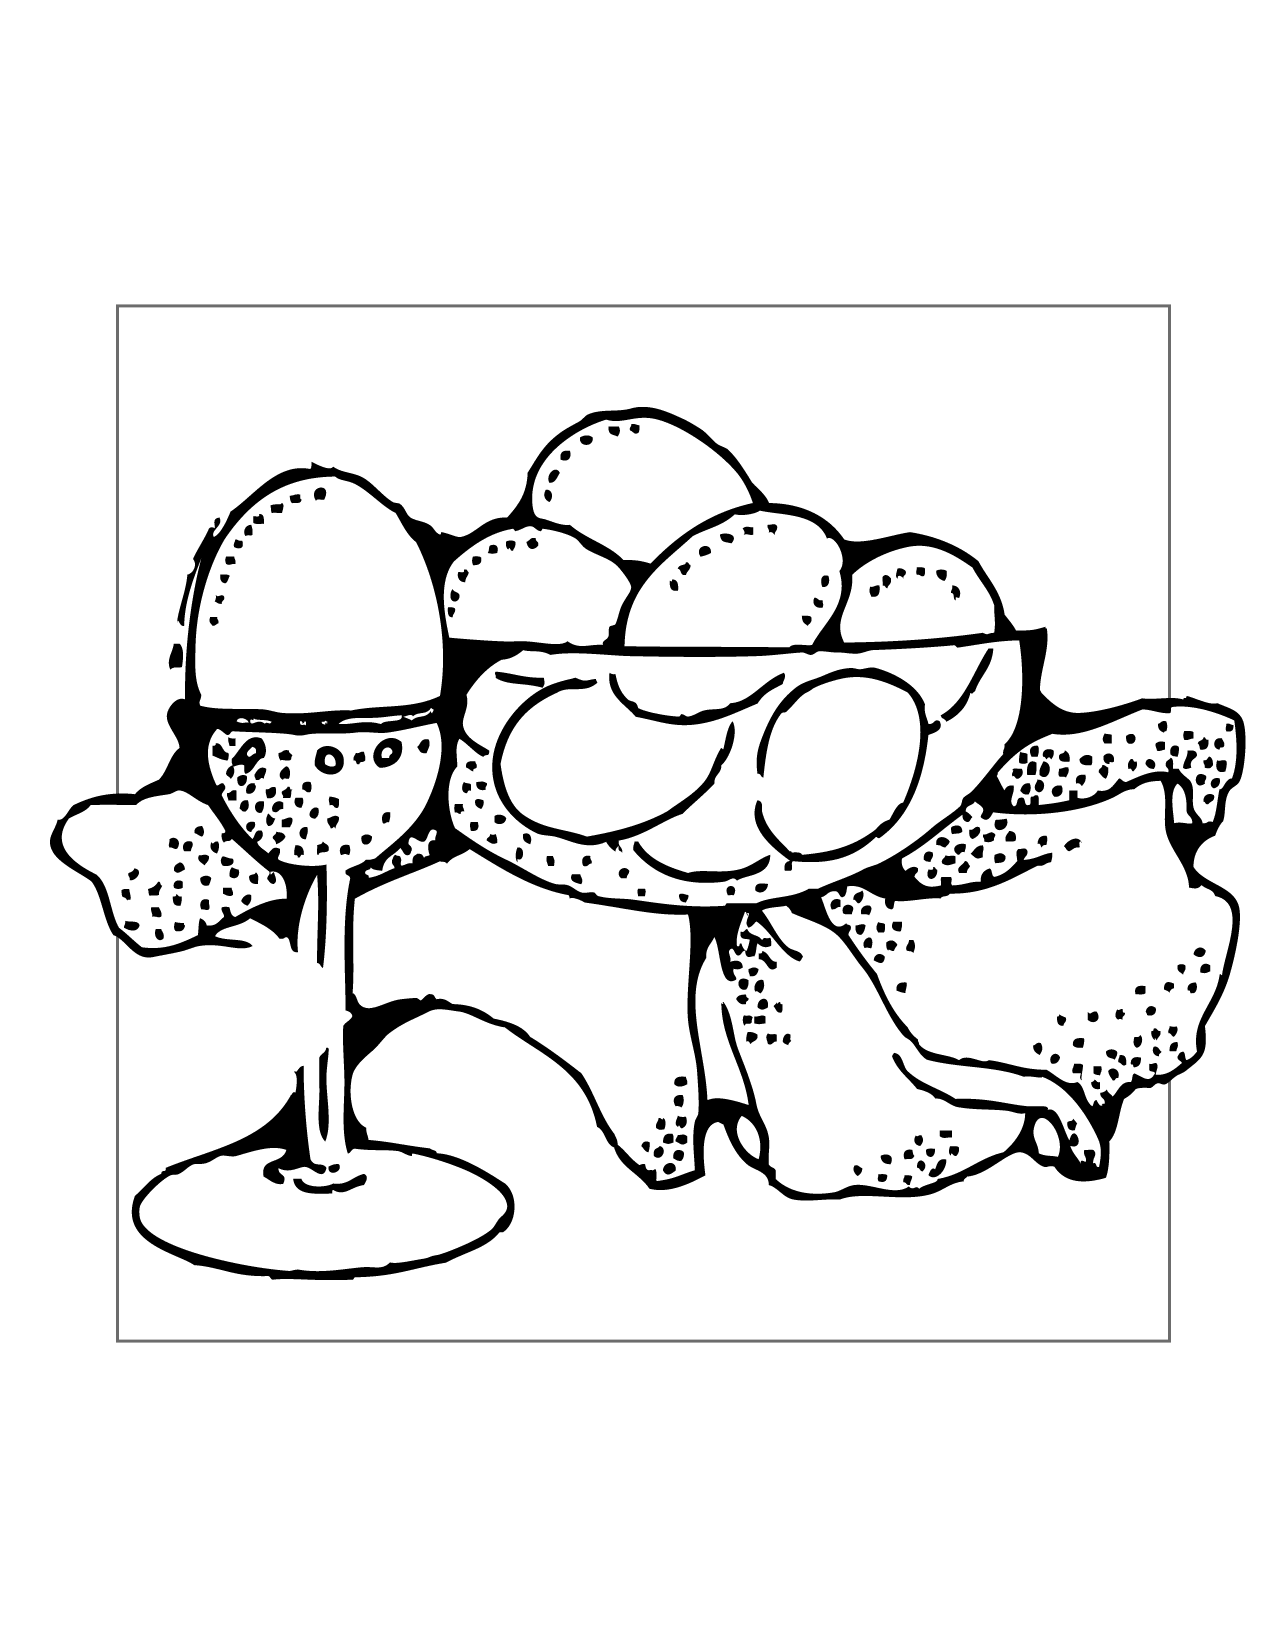 Soft Boiled Eggs And Holder Coloring Page